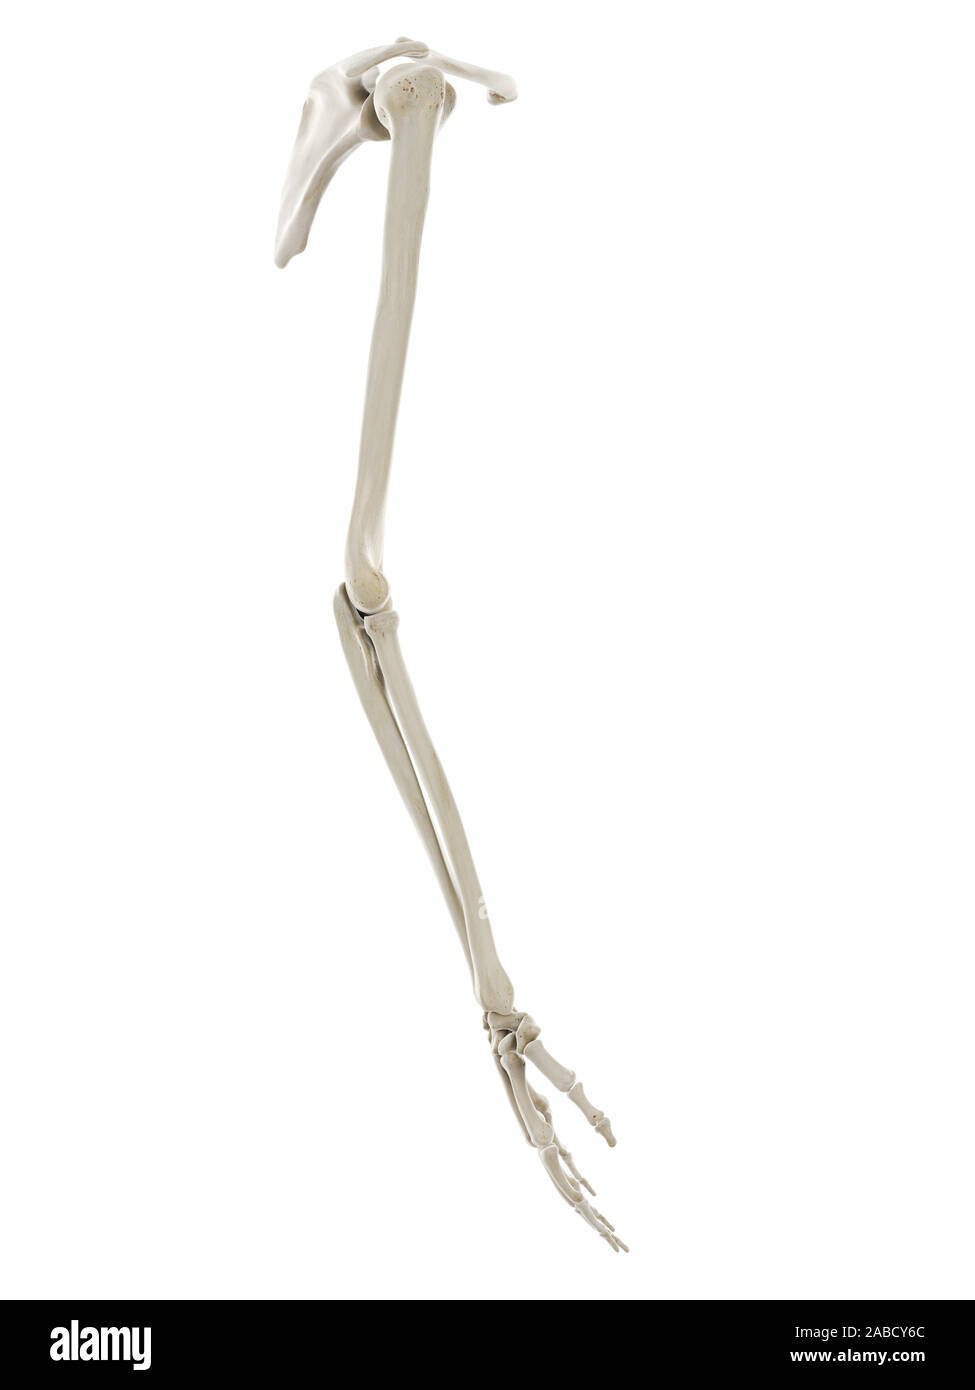 3d rendered medically accurate illustration of the bones of the arm Stock Photo